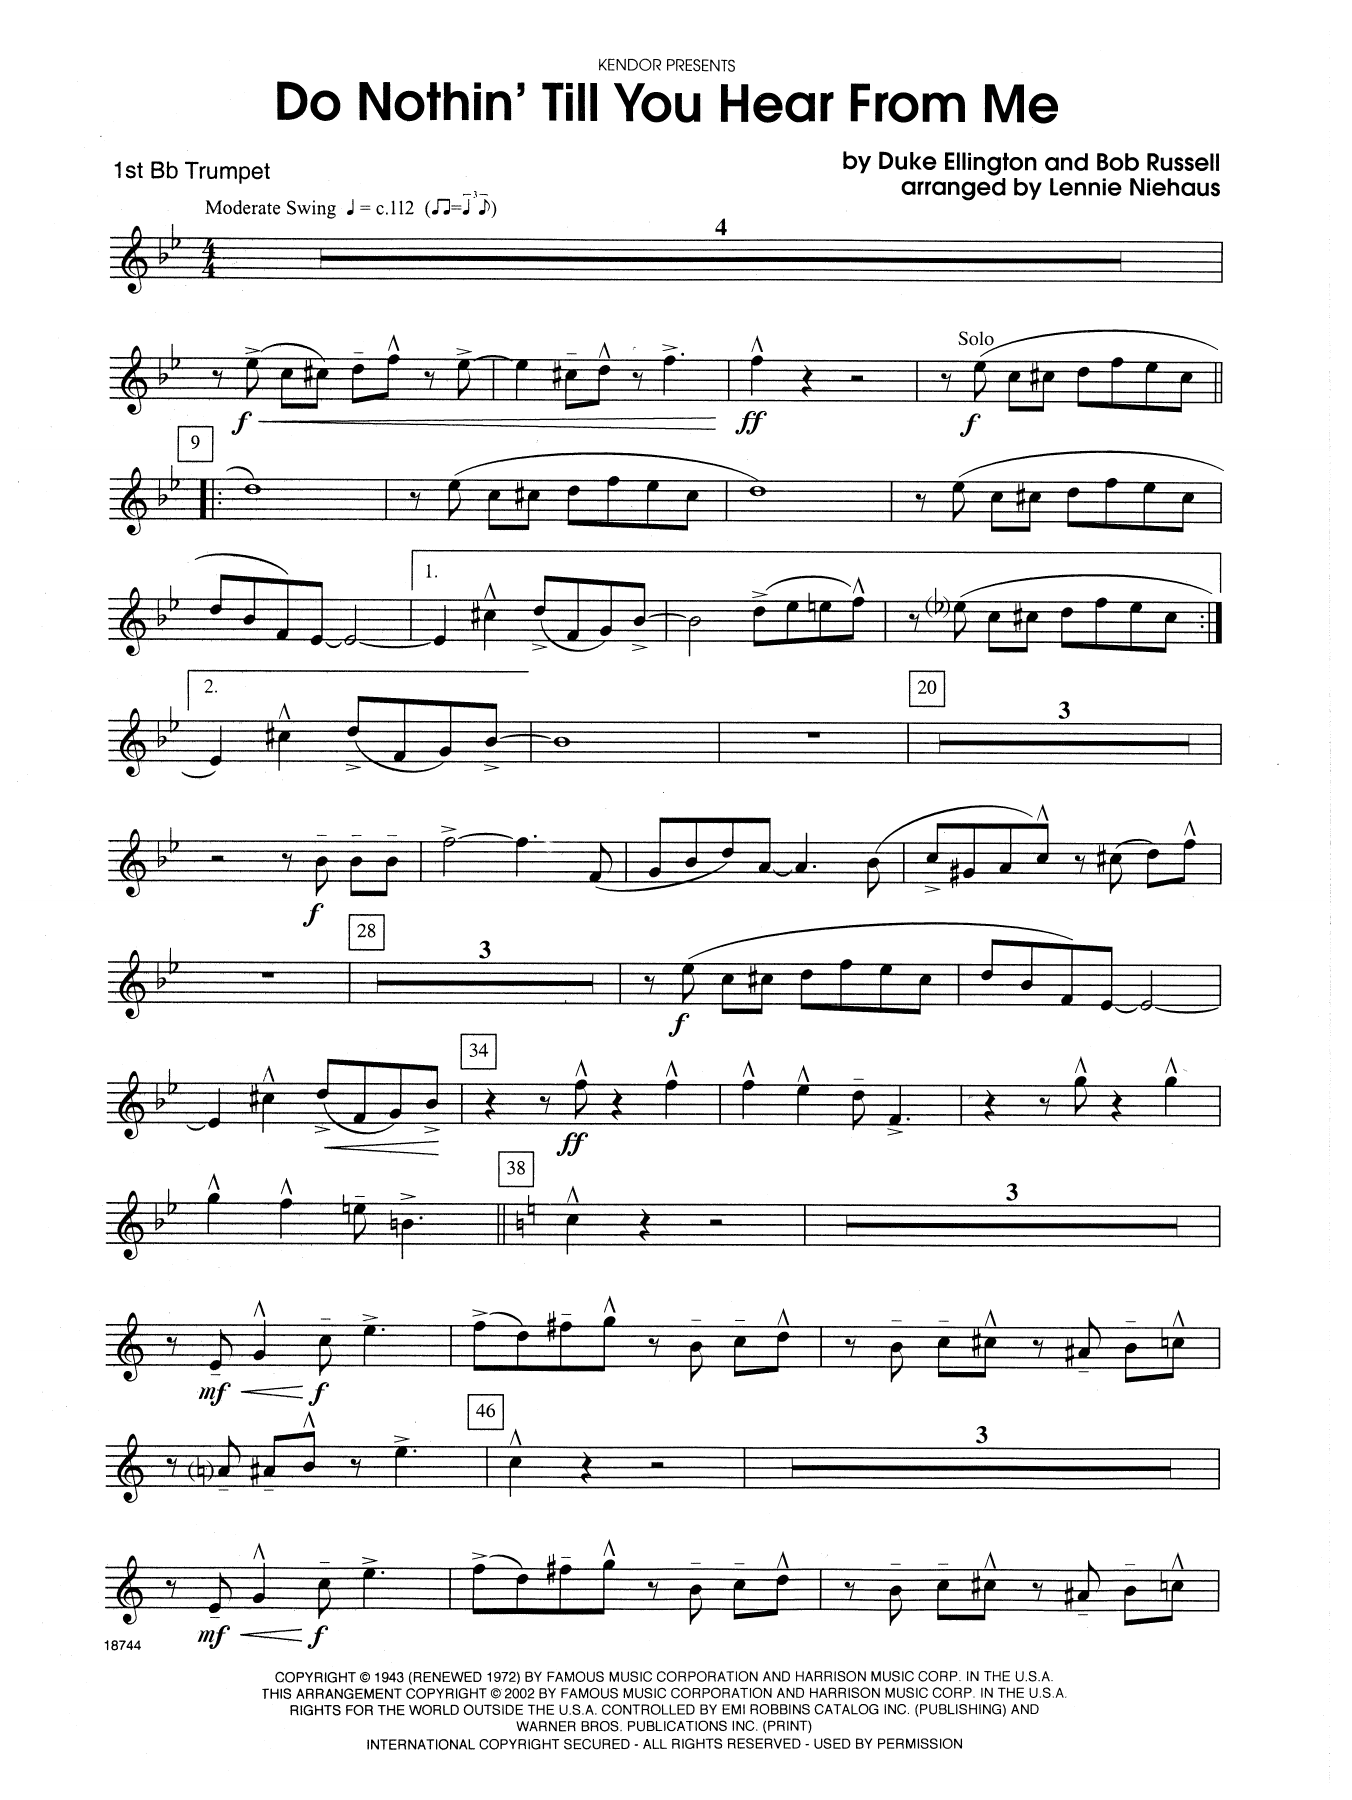 Download Lennie Niehaus Do Nothin' Till You Hear from Me - 1st Sheet Music